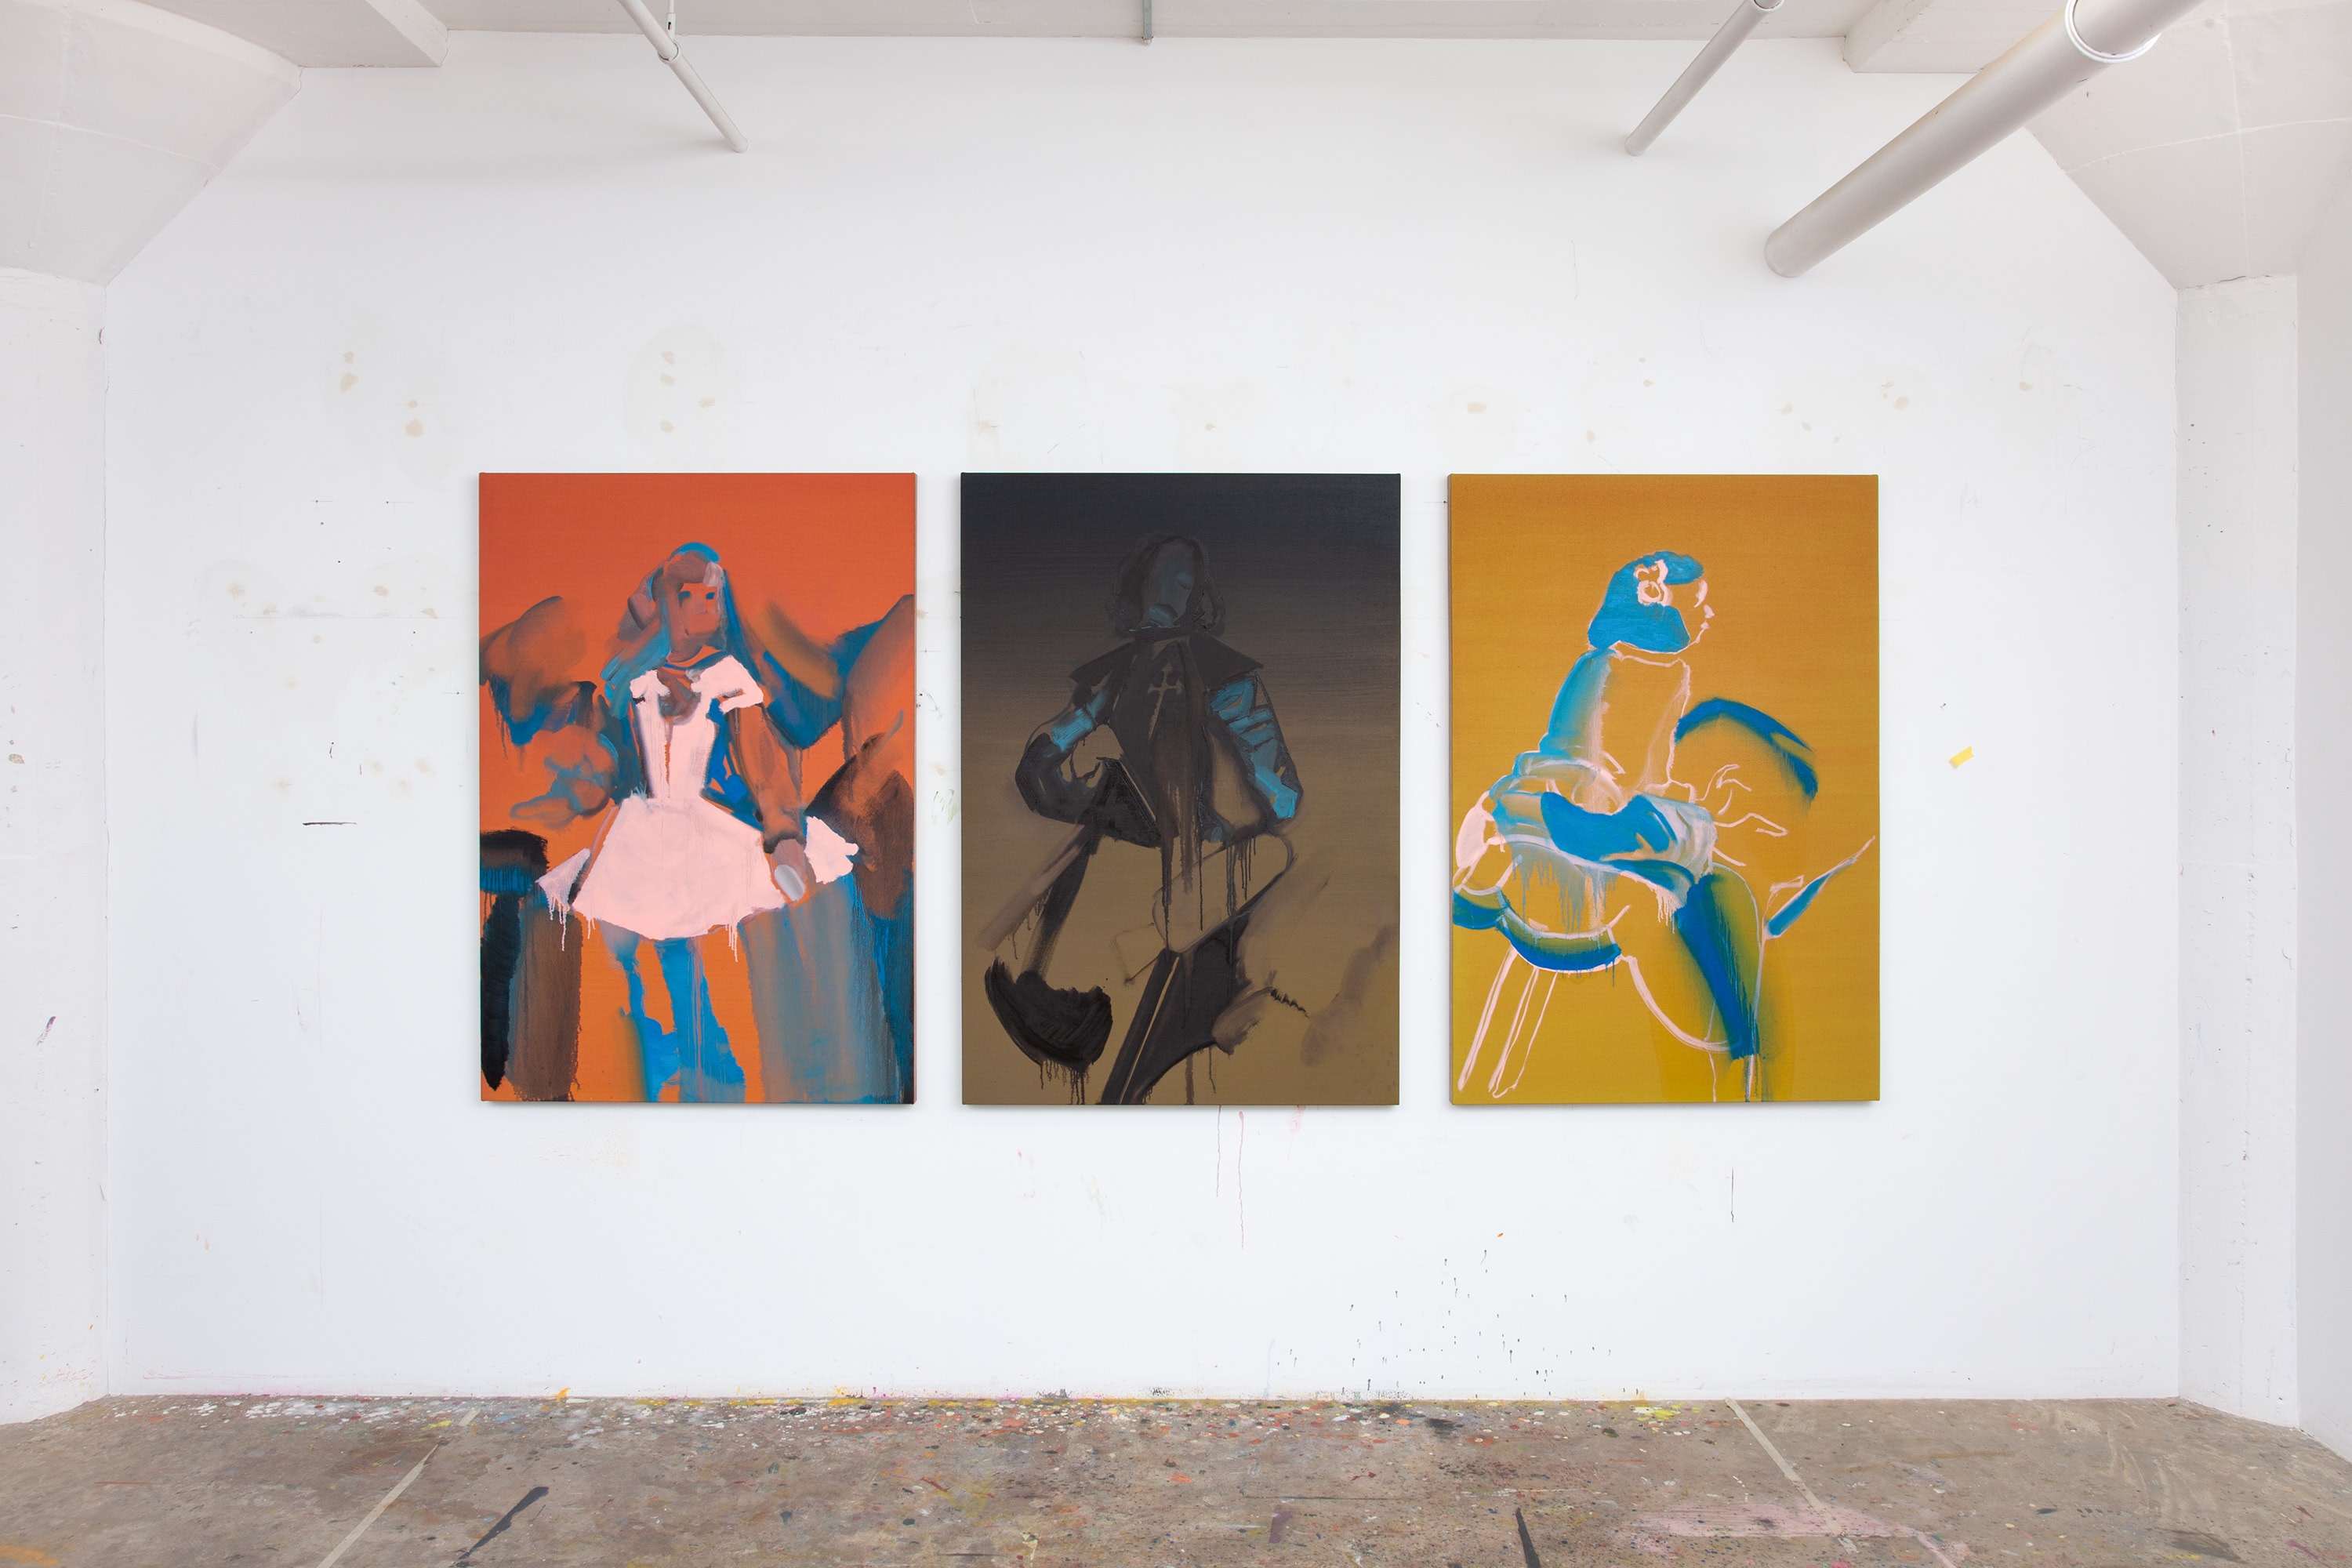 Works-in-progress in Andy Woll's studio, photographed in January 2021